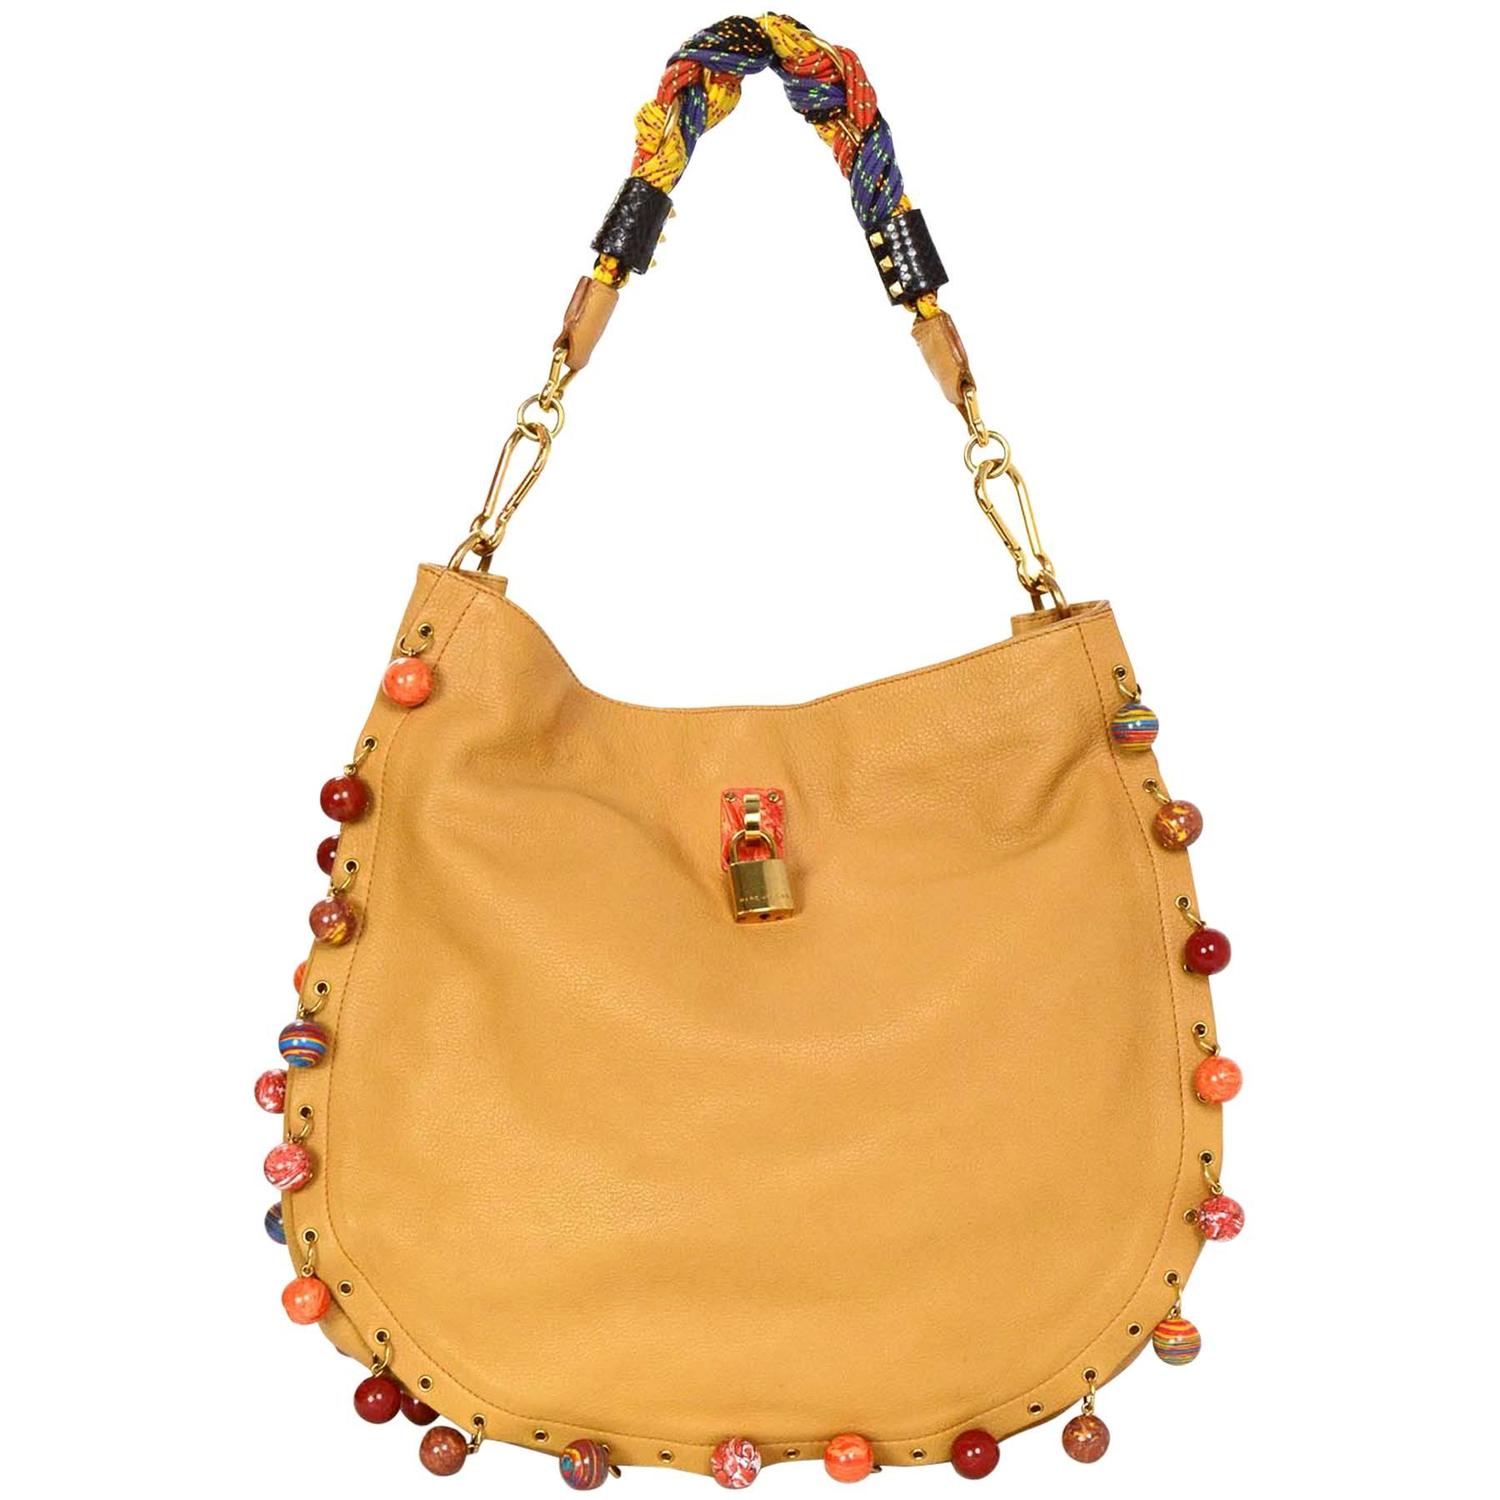 Marc Jacobs Multi-Colored Beaded Tan Daisy Hobo Bag GHW For Sale at 1stdibs